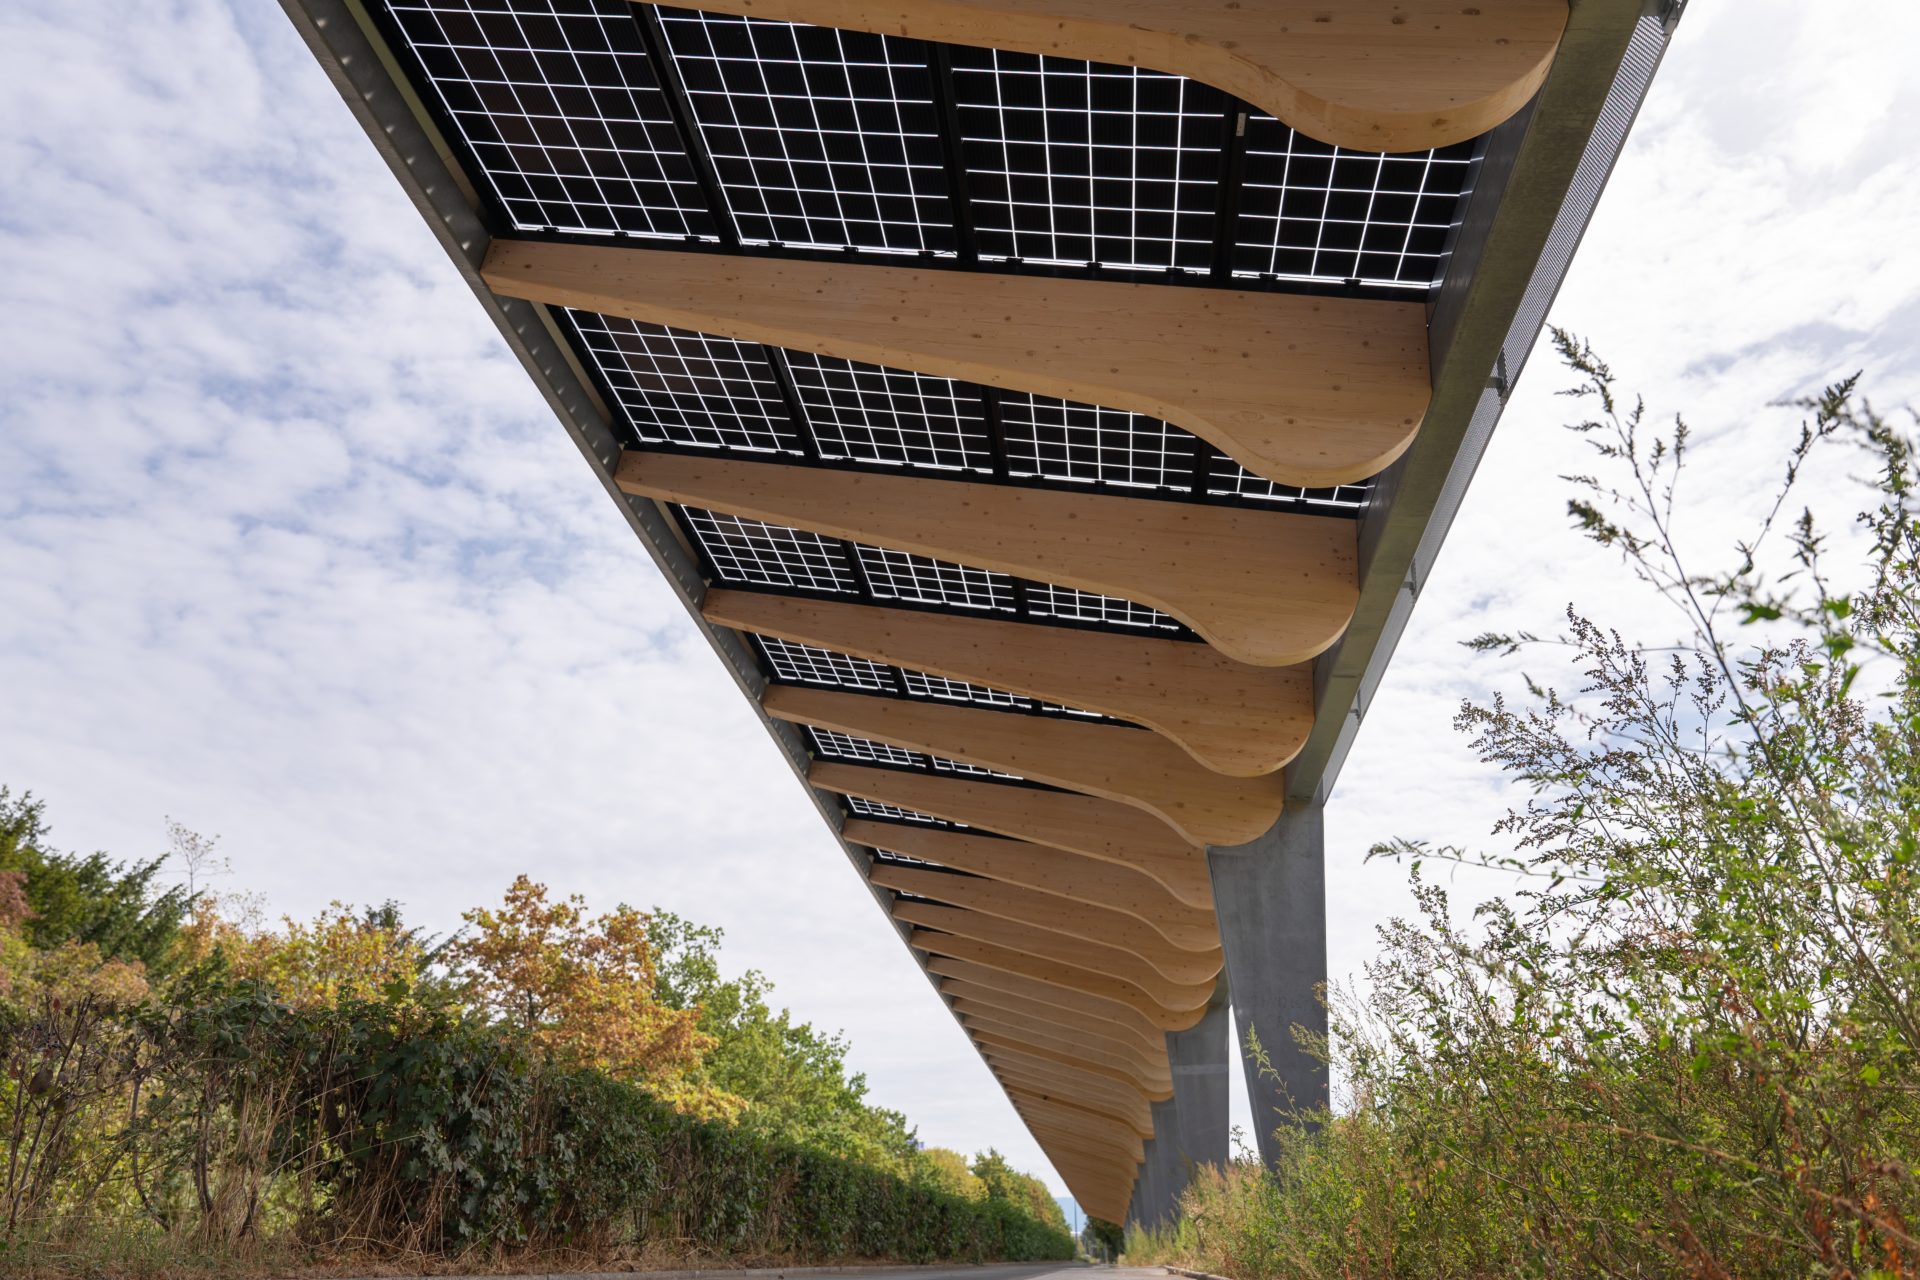 Switzerland’s first solar-powered cycle path